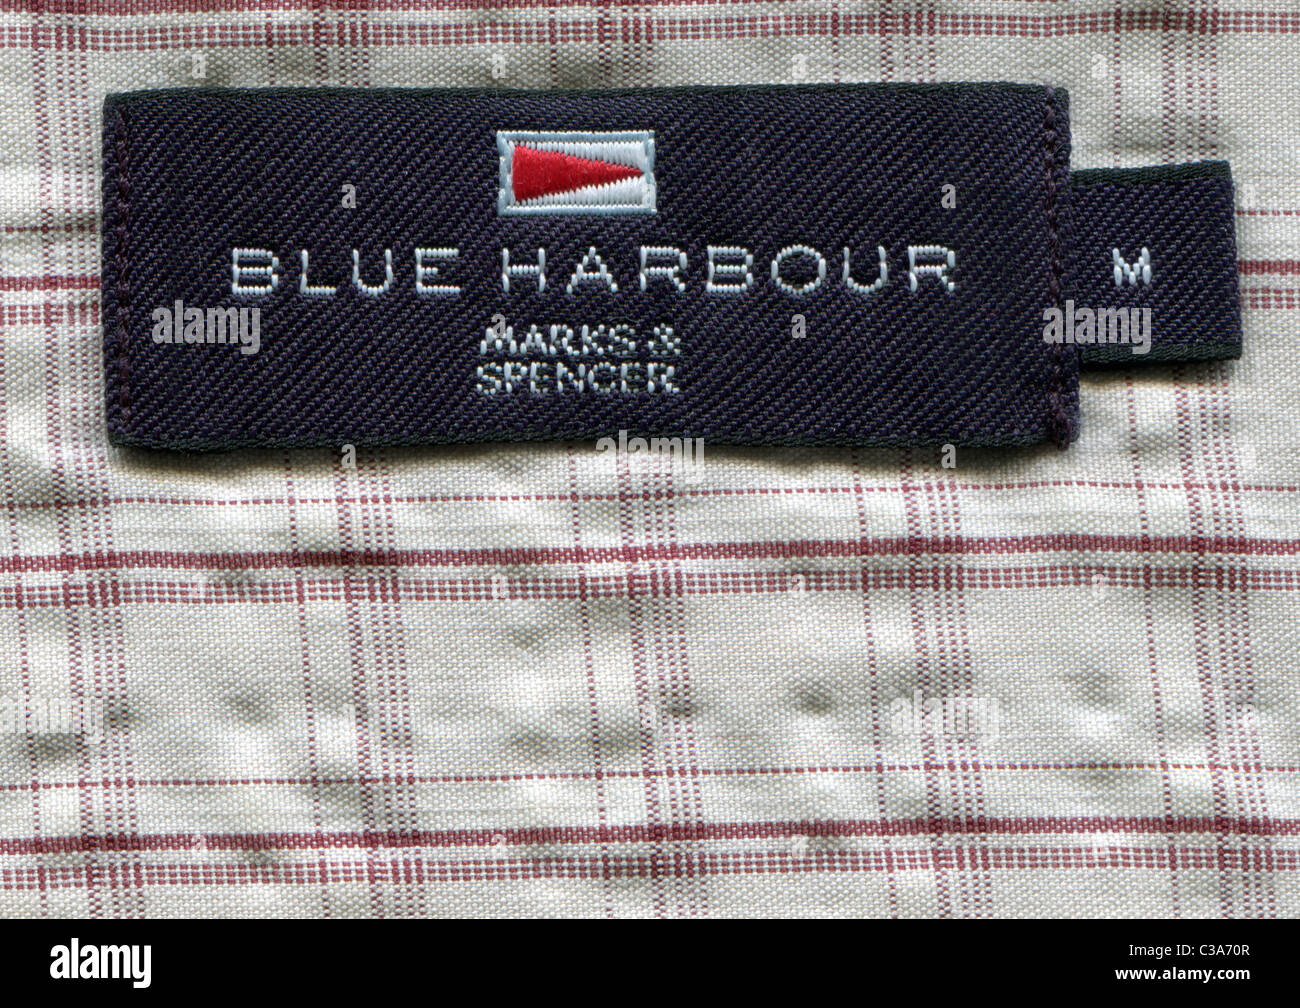 Detail of the label in the collar of a man's shirt from the clothing Blue harbor - TM of Marks and Spenser Stock Photo